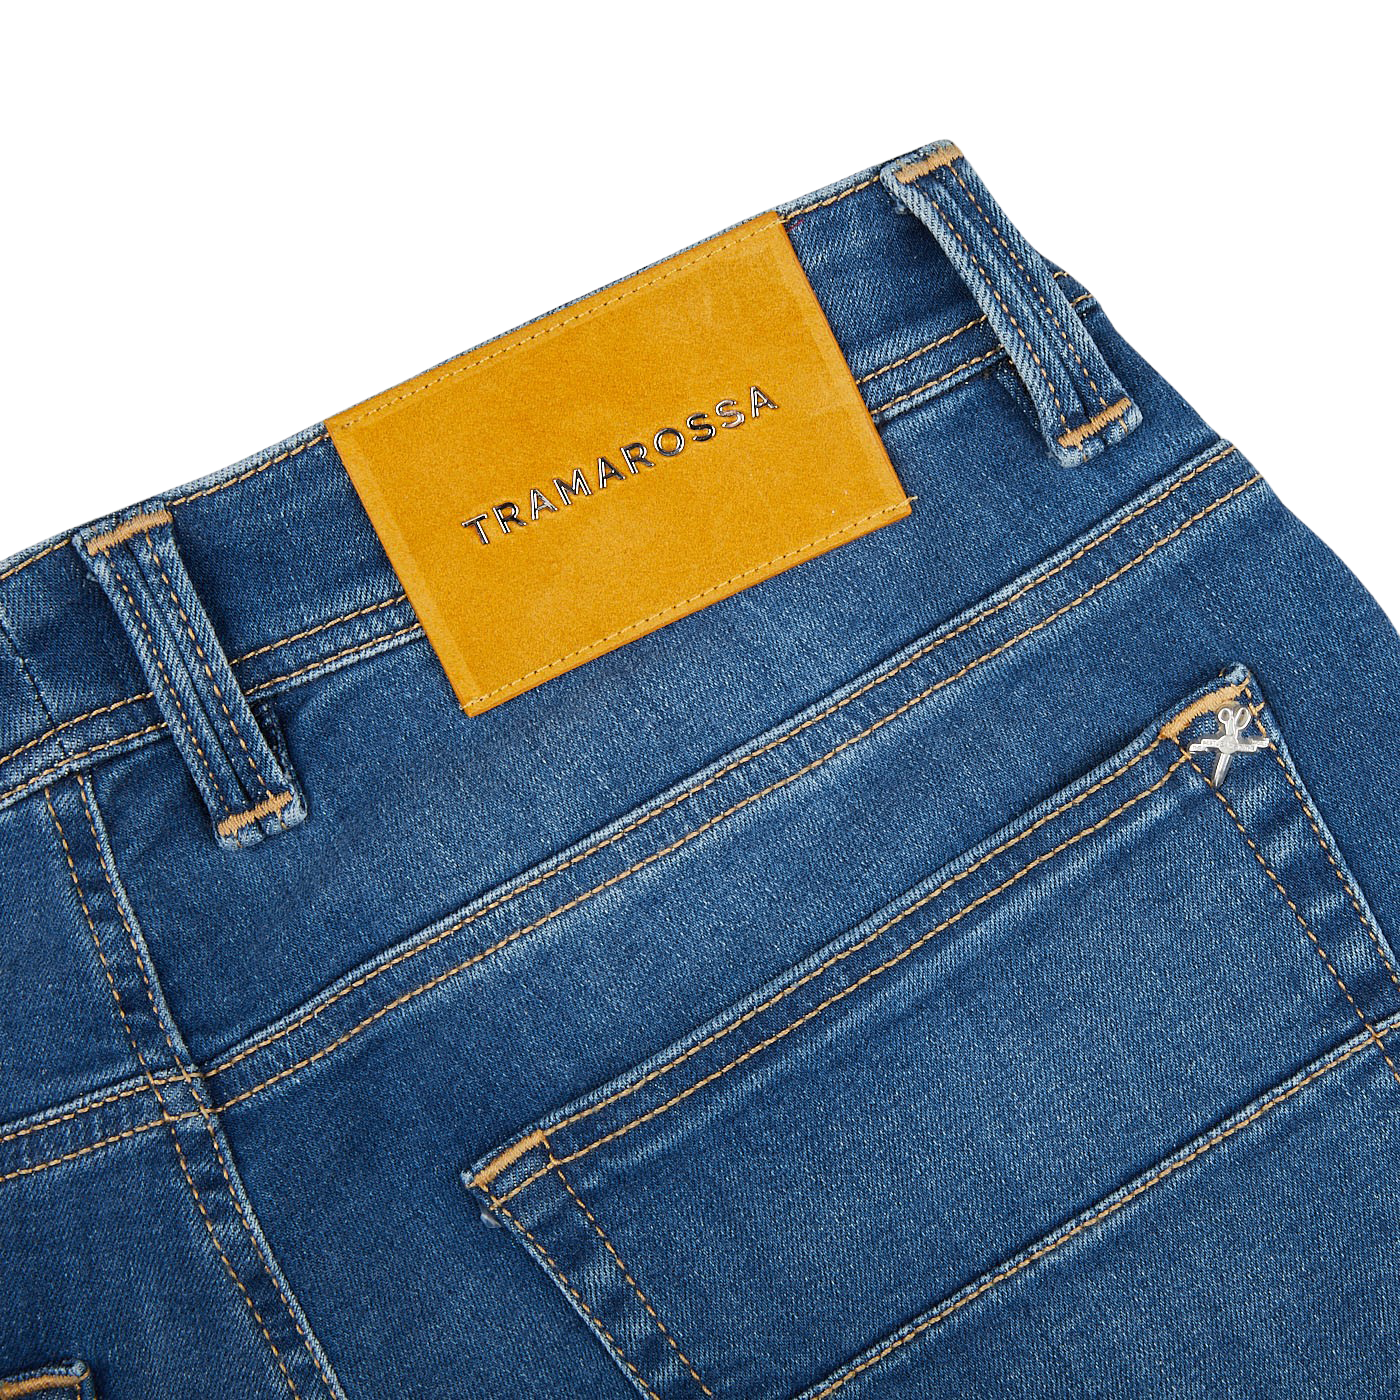 A pair of Tramarossa Washed Blue Leonardo 6 Months jeans with a yellow label on the back.